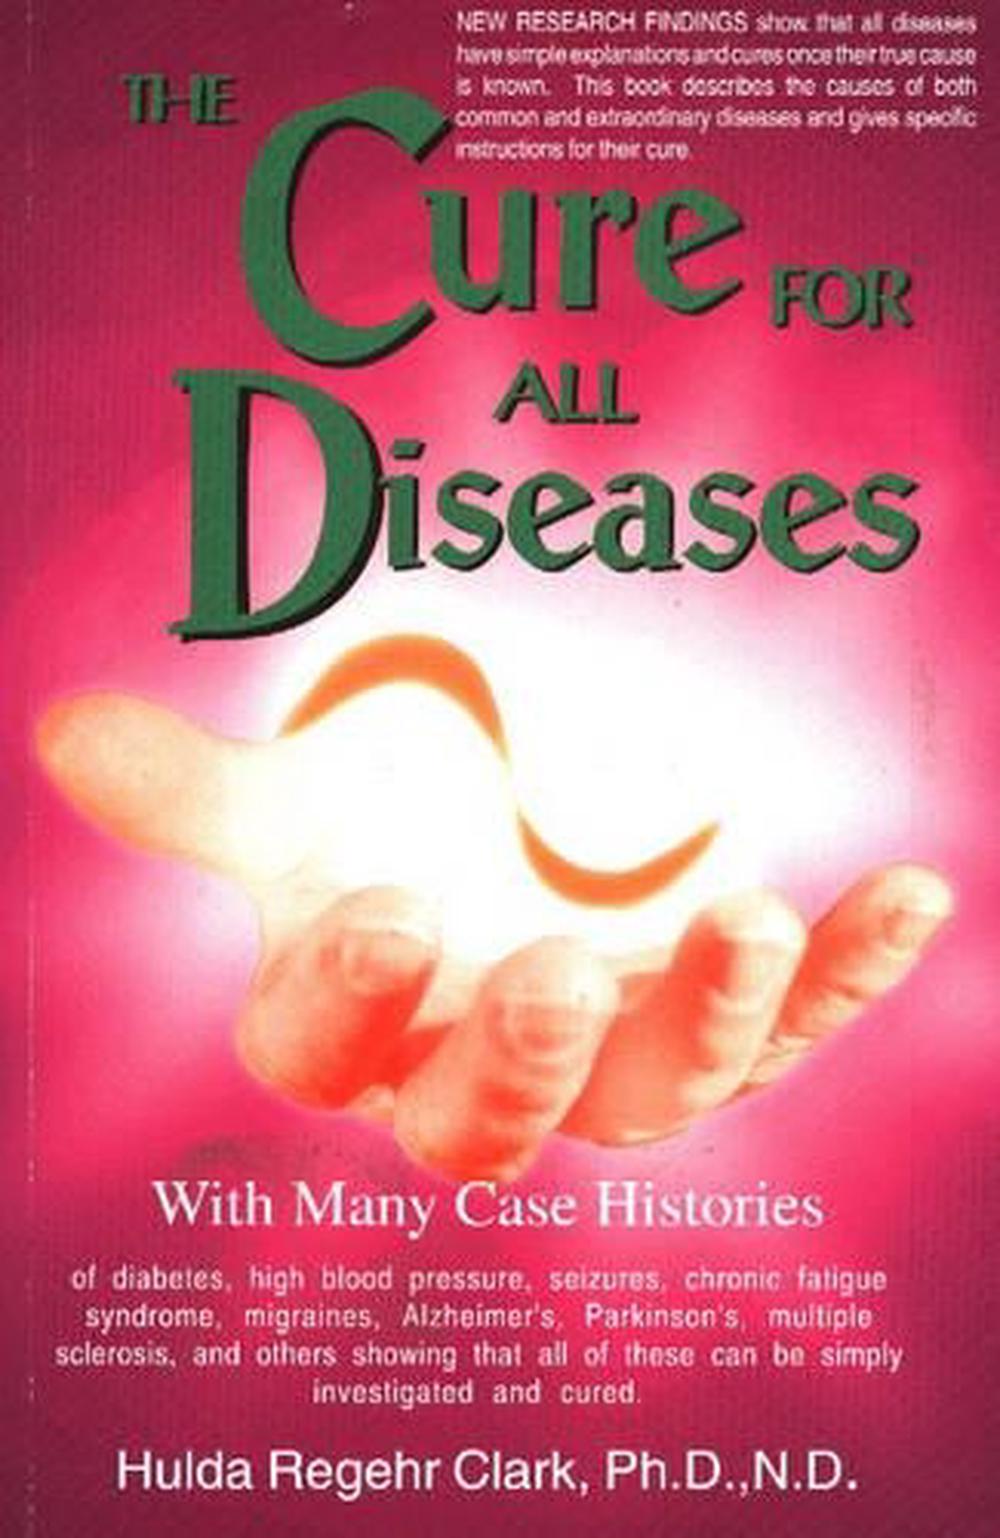 The Cure For All Diseases With Many Case Histories By Hulda Regehr